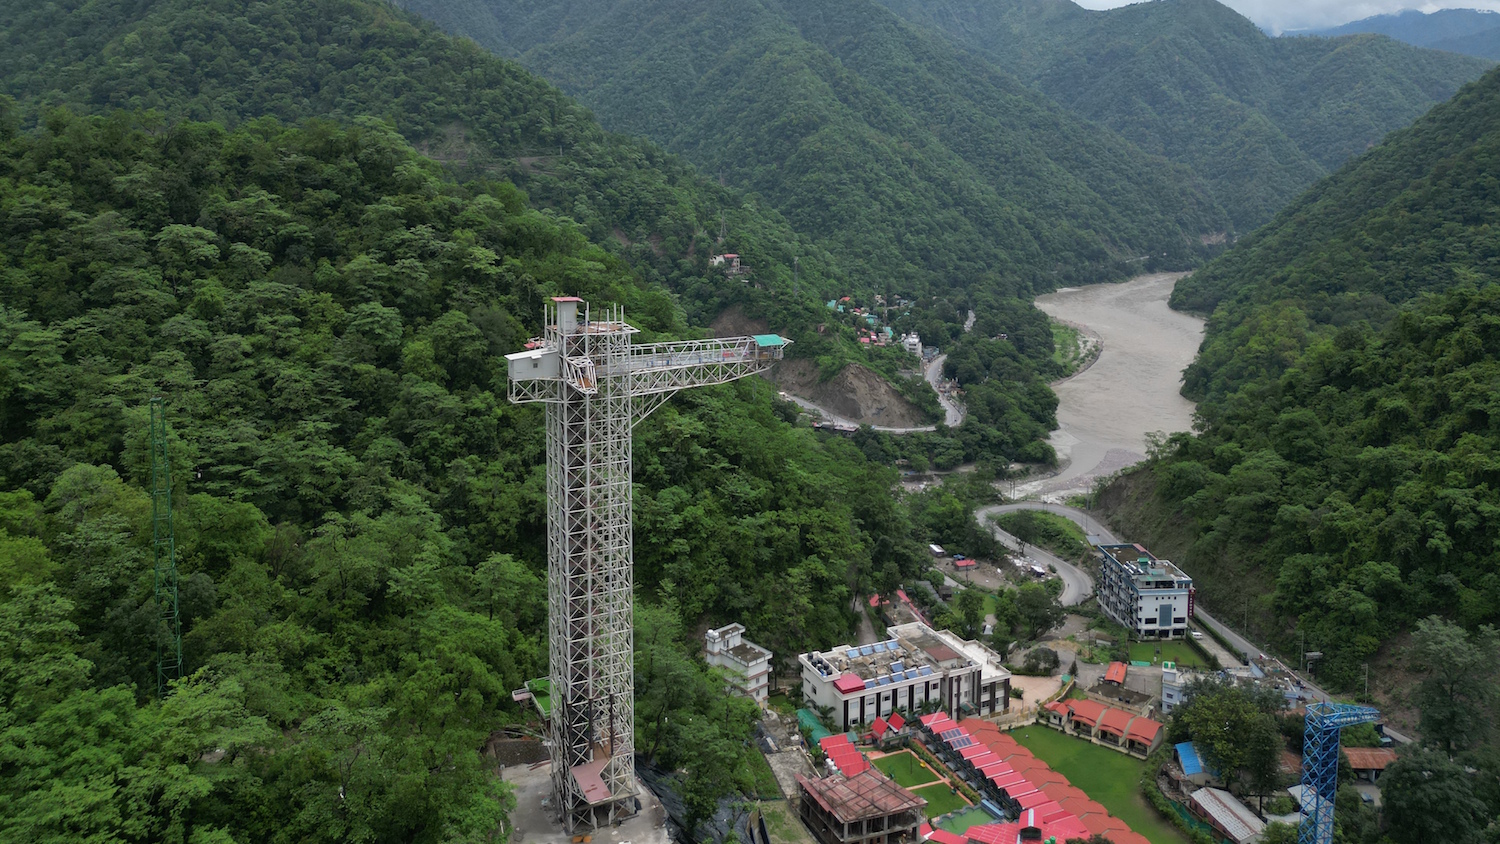 Photo of Himalayan Bungy with the Ganges River far below to illustrate BIM and bungee jumping